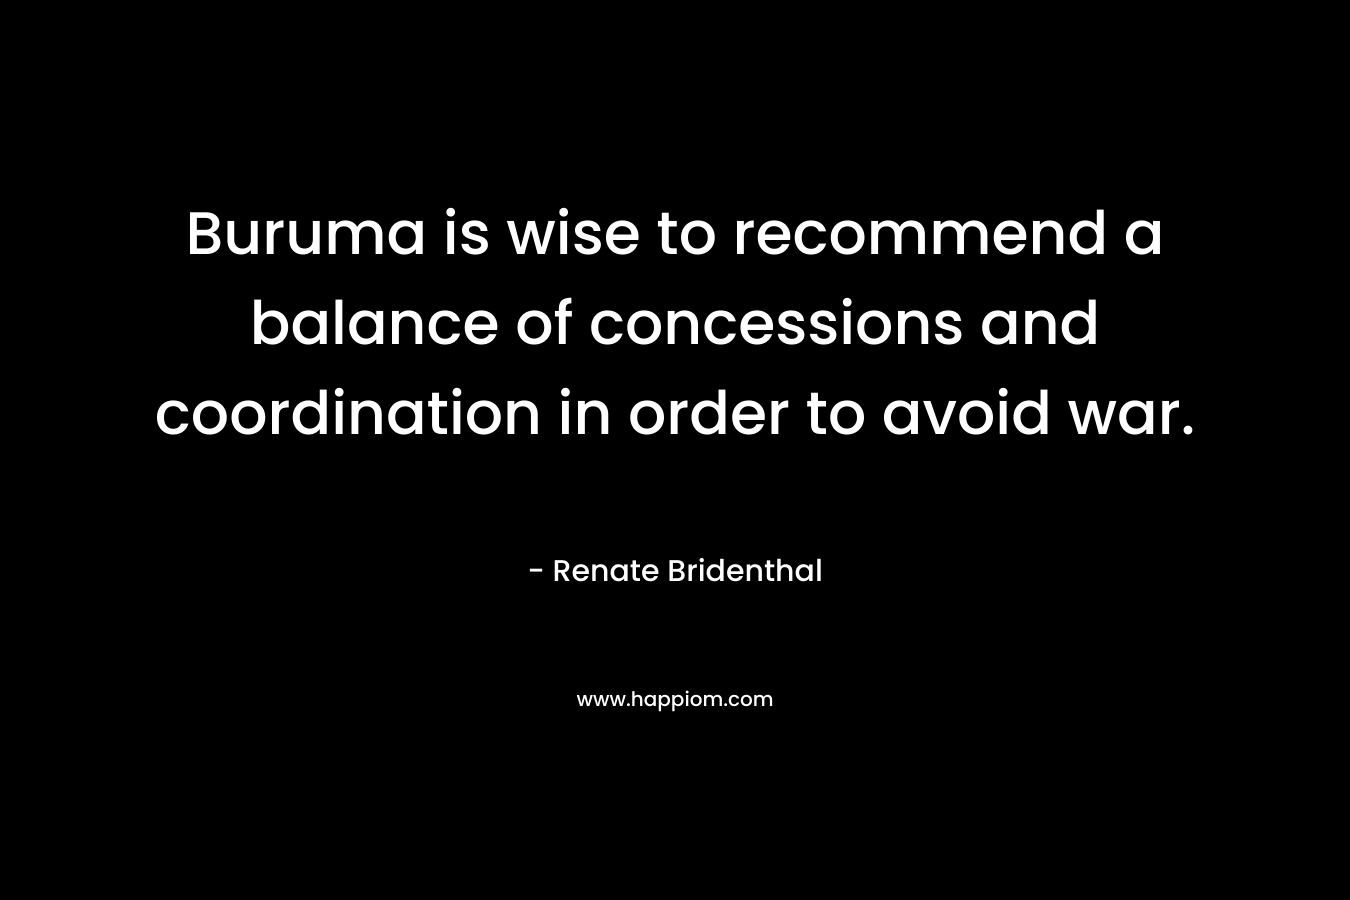 Buruma is wise to recommend a balance of concessions and coordination in order to avoid war. – Renate Bridenthal